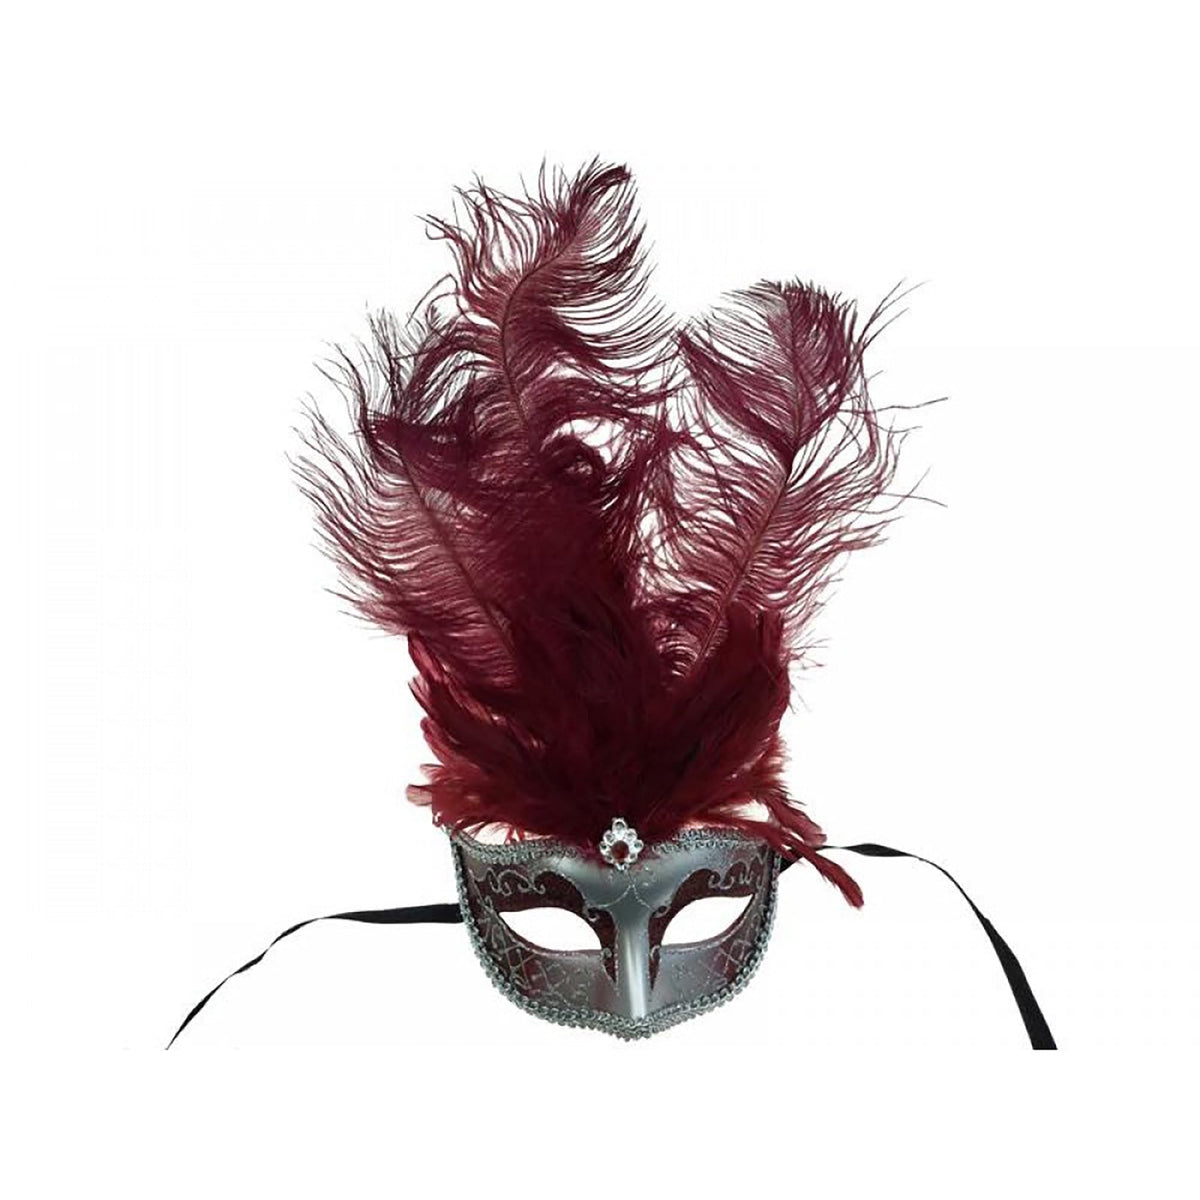 KBW GLOBAL CORP Costume Accessories Silver Venitian Mask With Burgundy Feather, 1 Count 831687061516